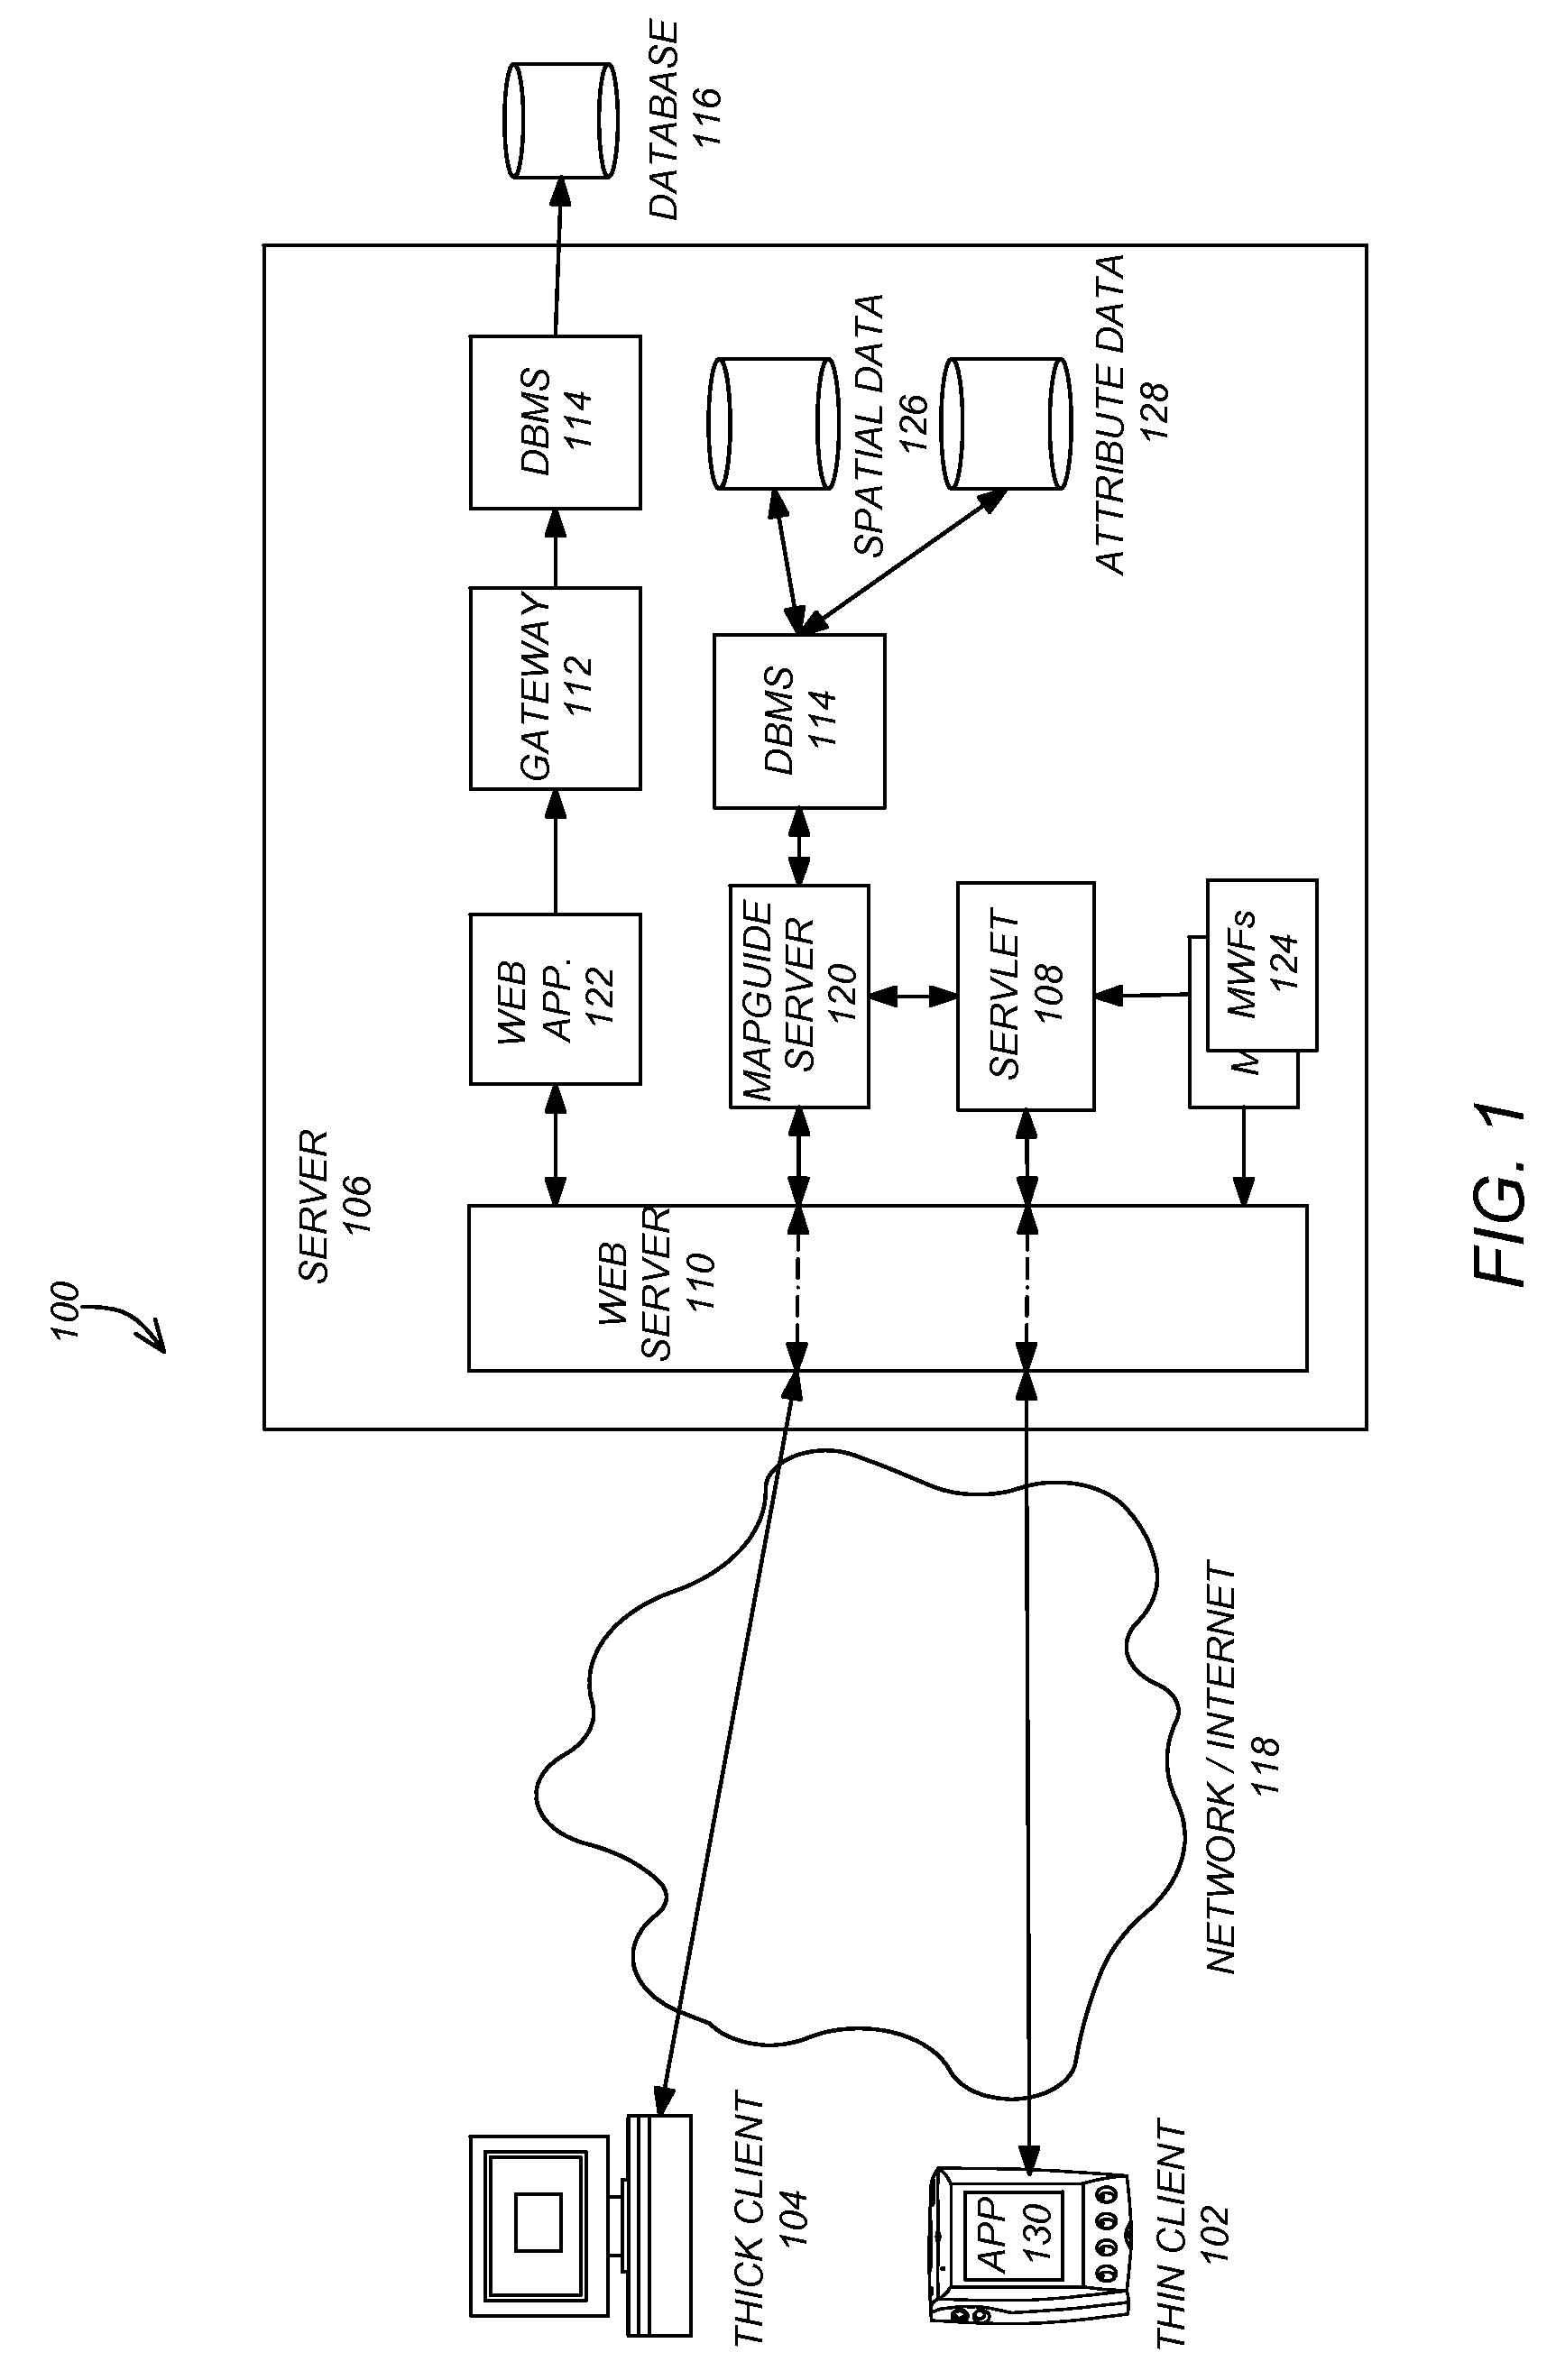 Single Gesture Map Navigation Graphical User Interface for a Thin Client